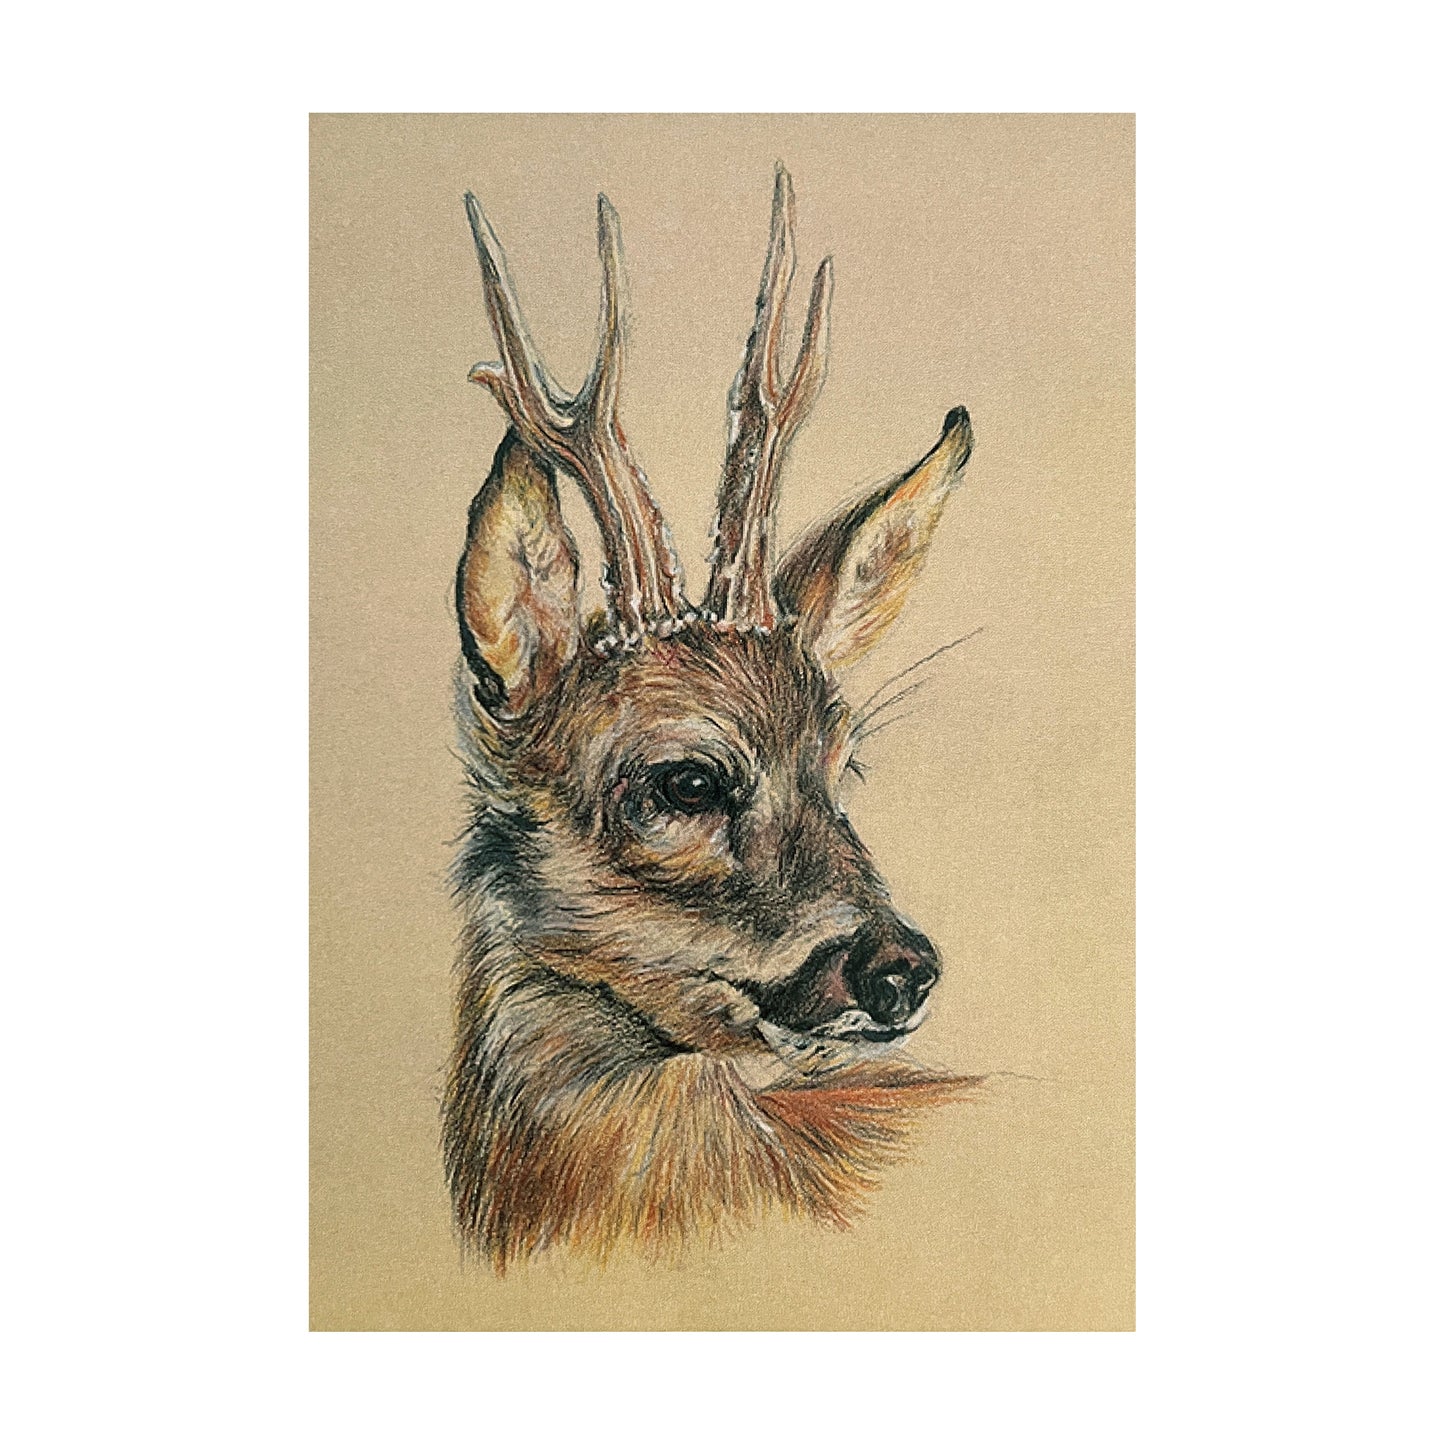 "Roe Buck" Signed Limited Edition Giclée Print